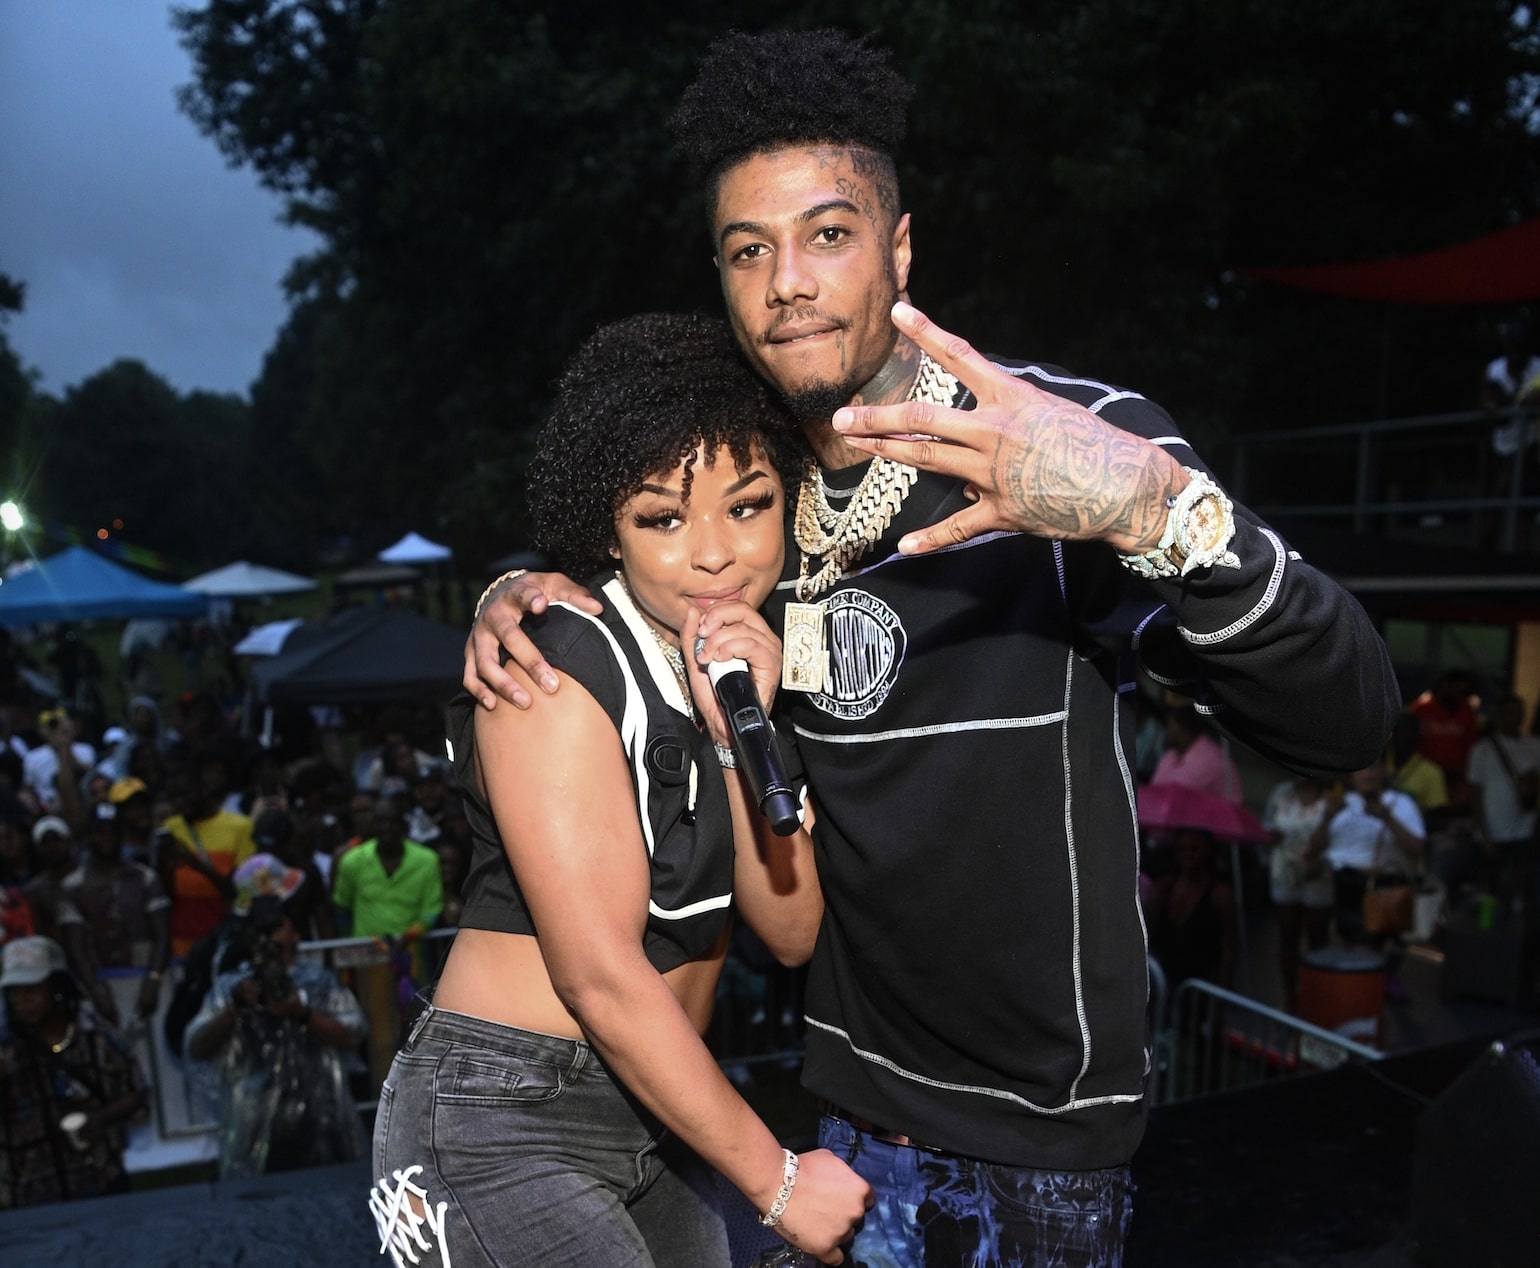 Shocking Video! Rapper Blueface And His Girlfriend Chrisean Rock